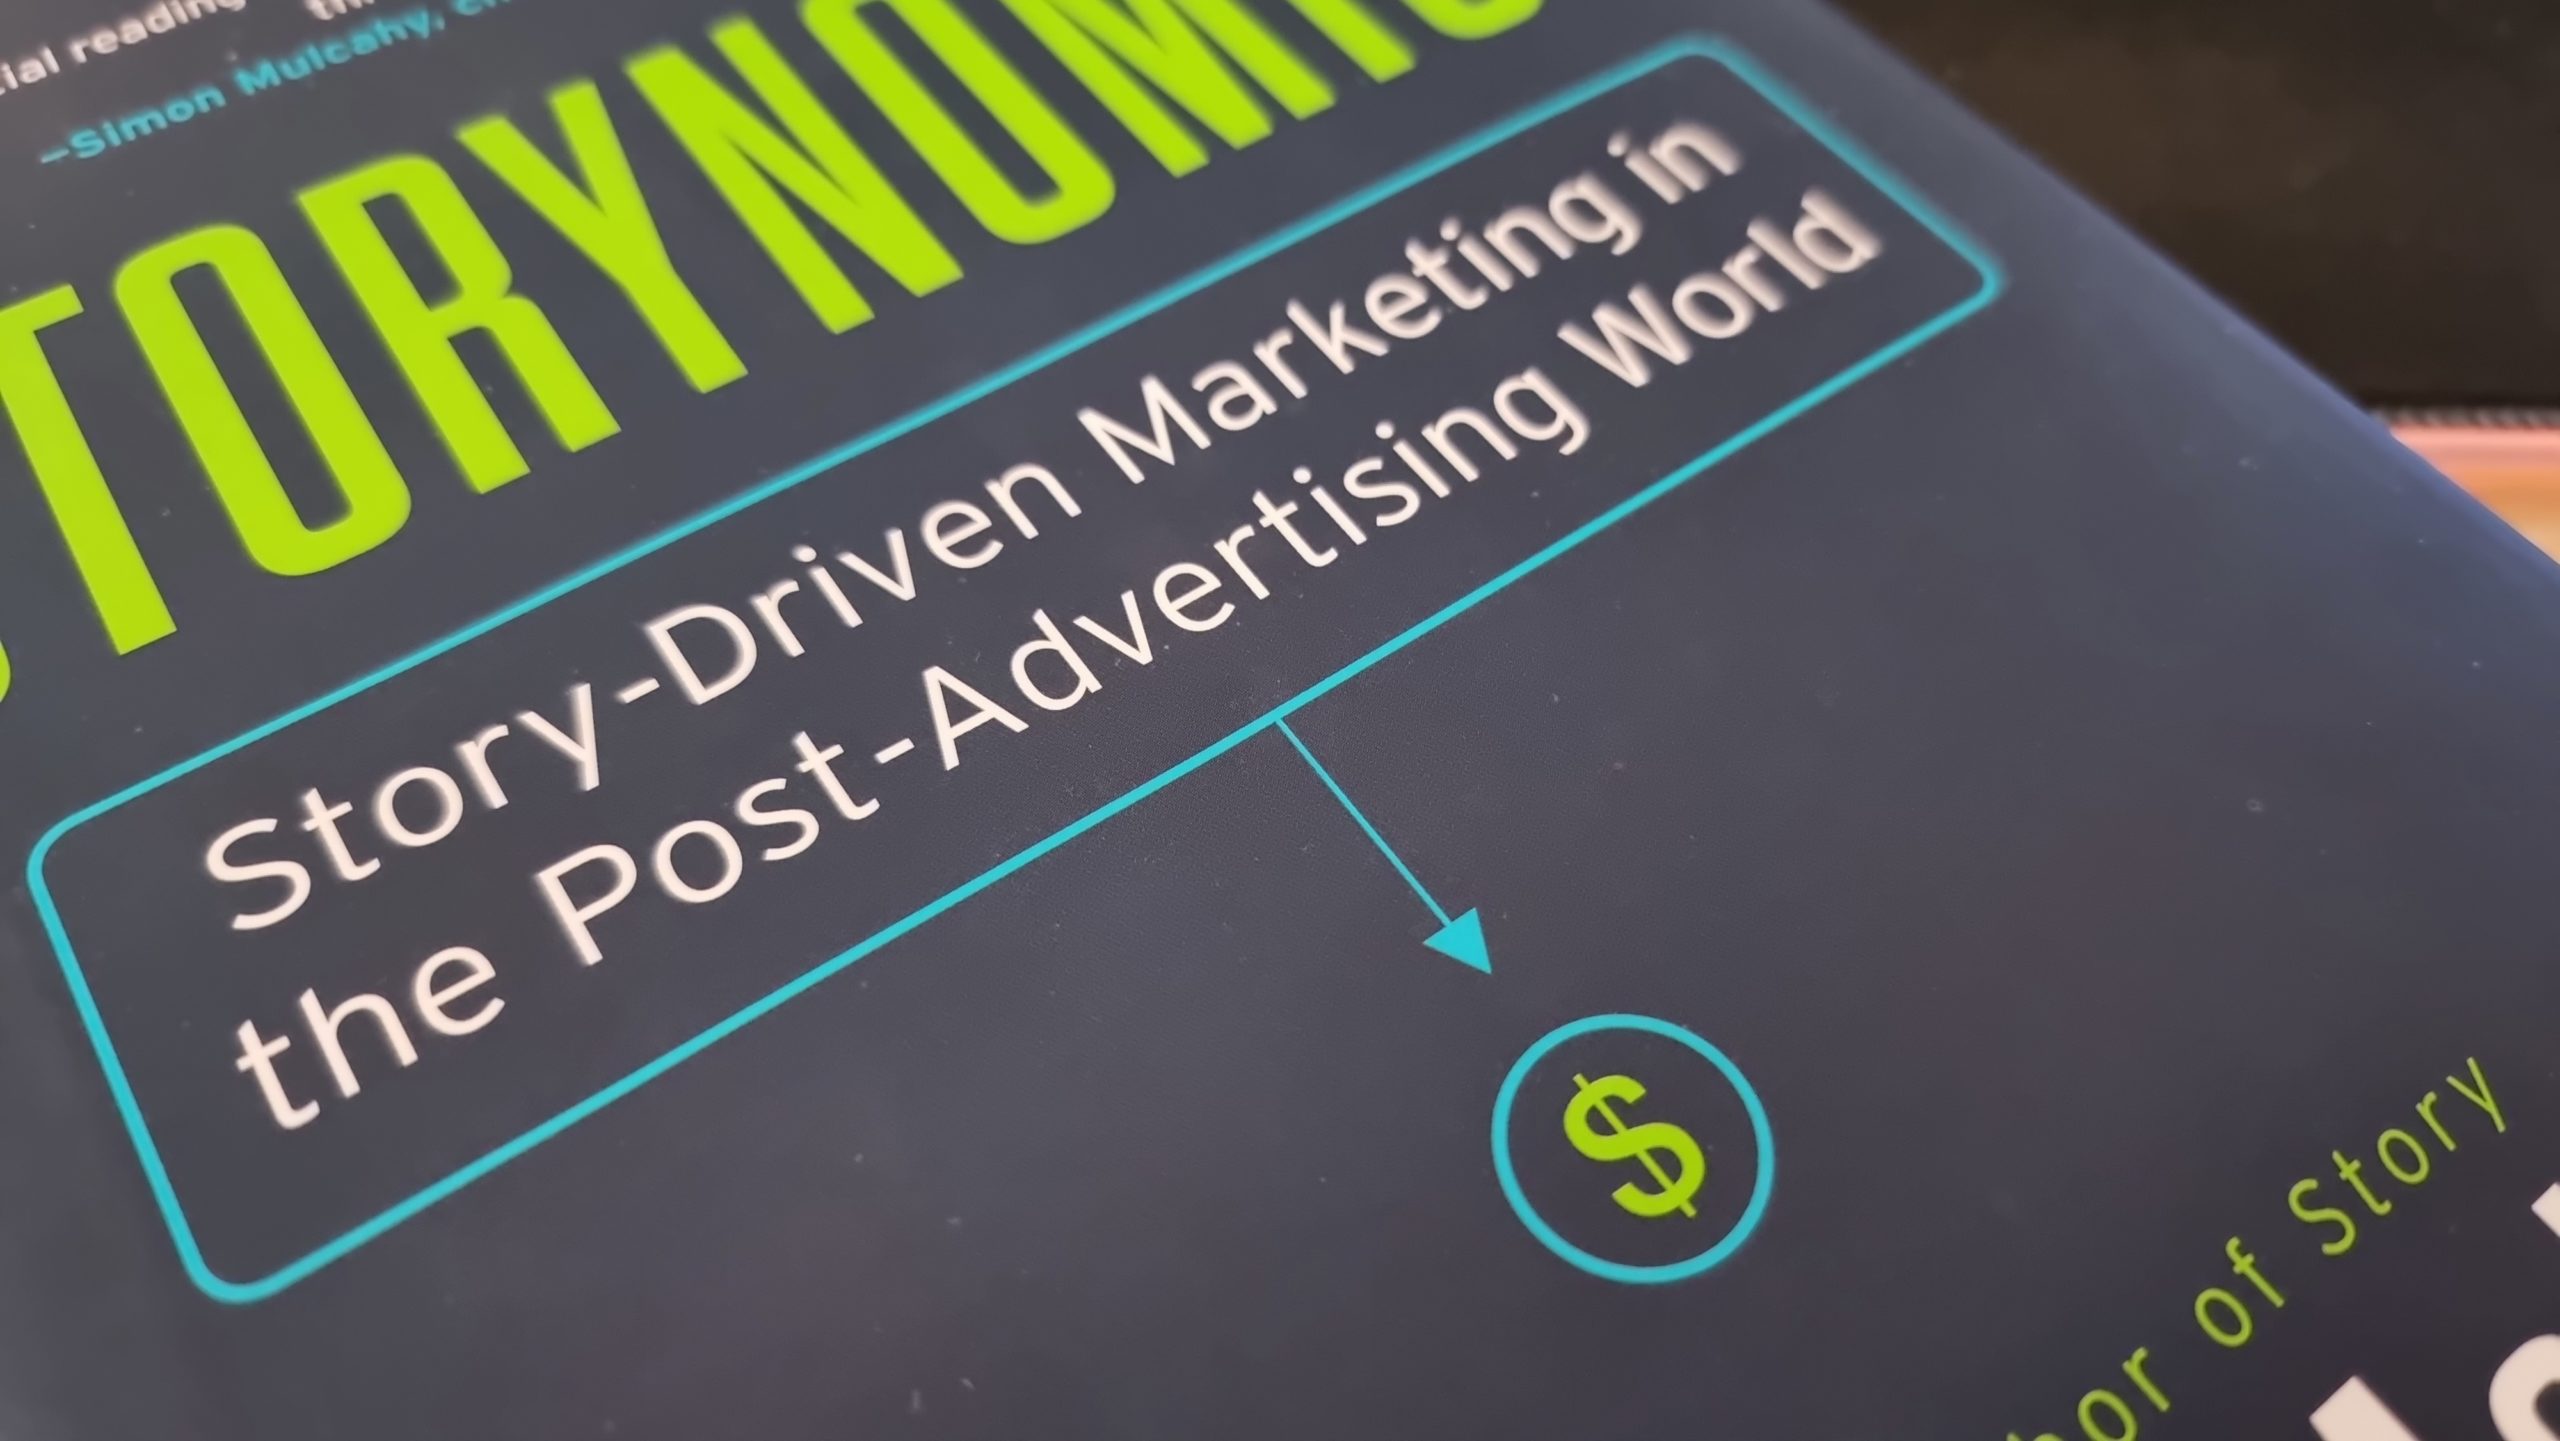 Story-Driven Marketing in the Post-Advertising World